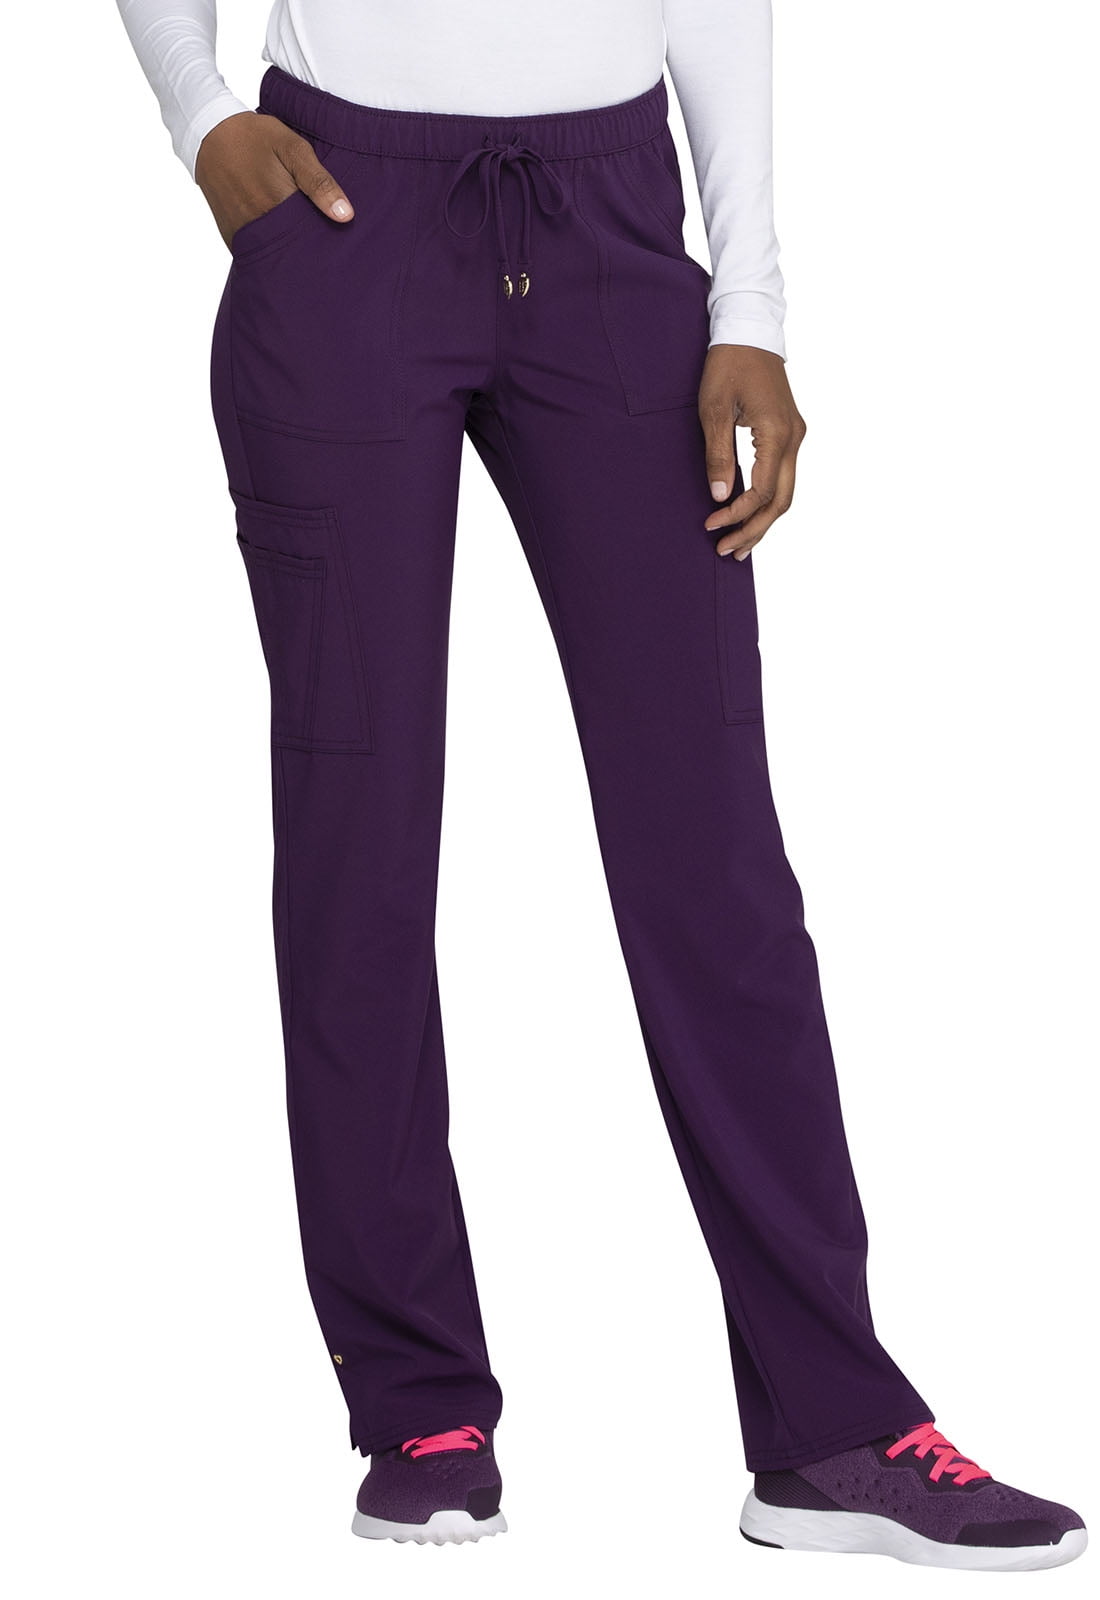 Heartsoul Love Always Scrubs Pant for Women, Low Rise Drawstring, Plus  Size, HS025T, 2XL Tall, Eggplant 